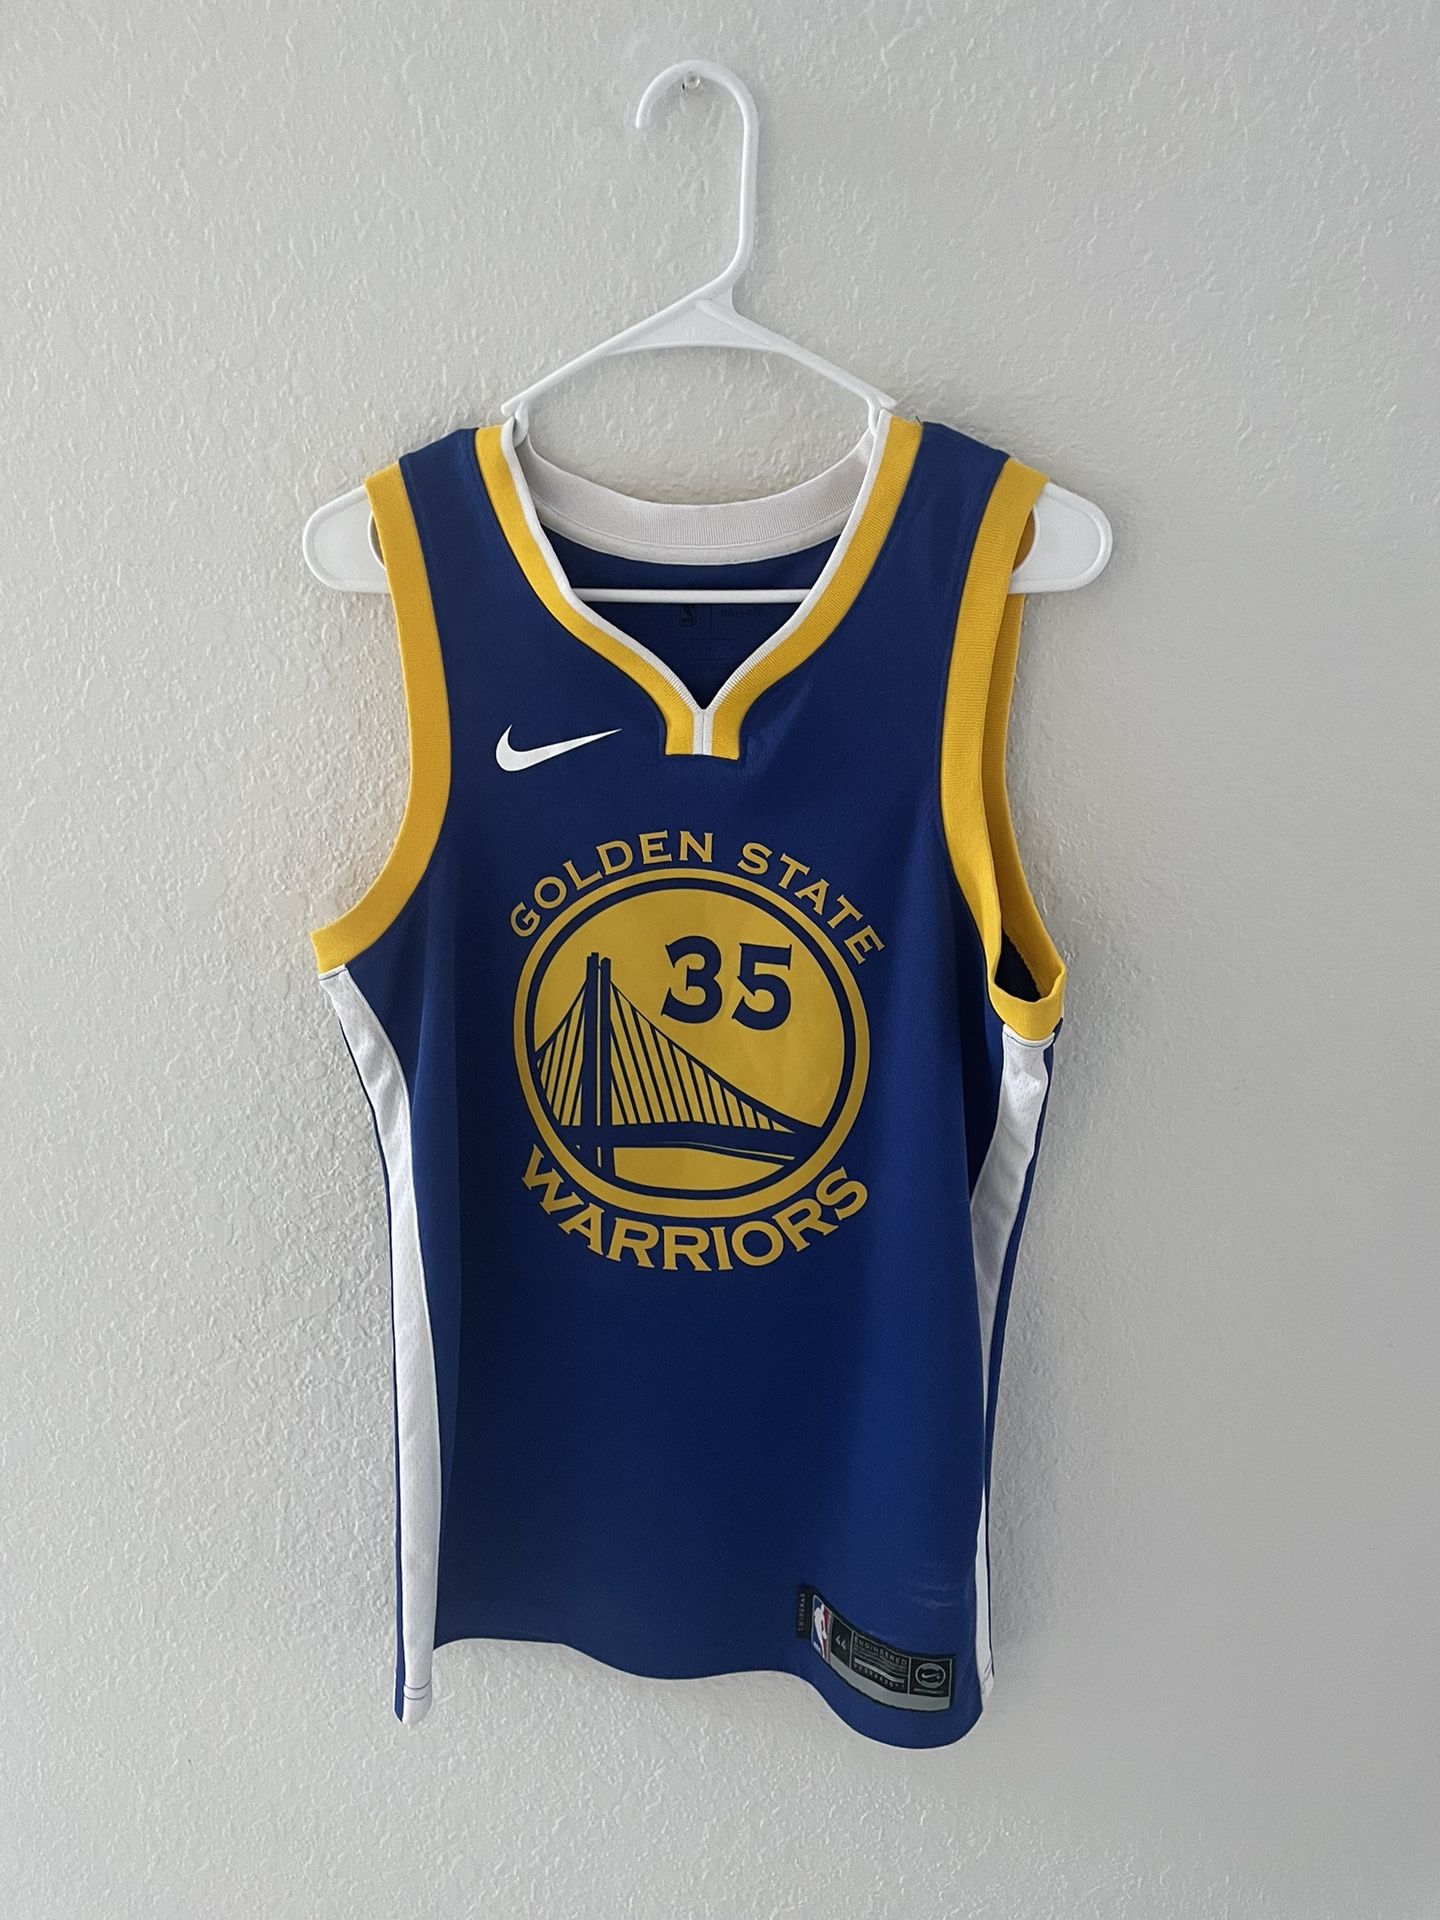 Kevin Durant Golden State Warriors NBA Jerseys for sale